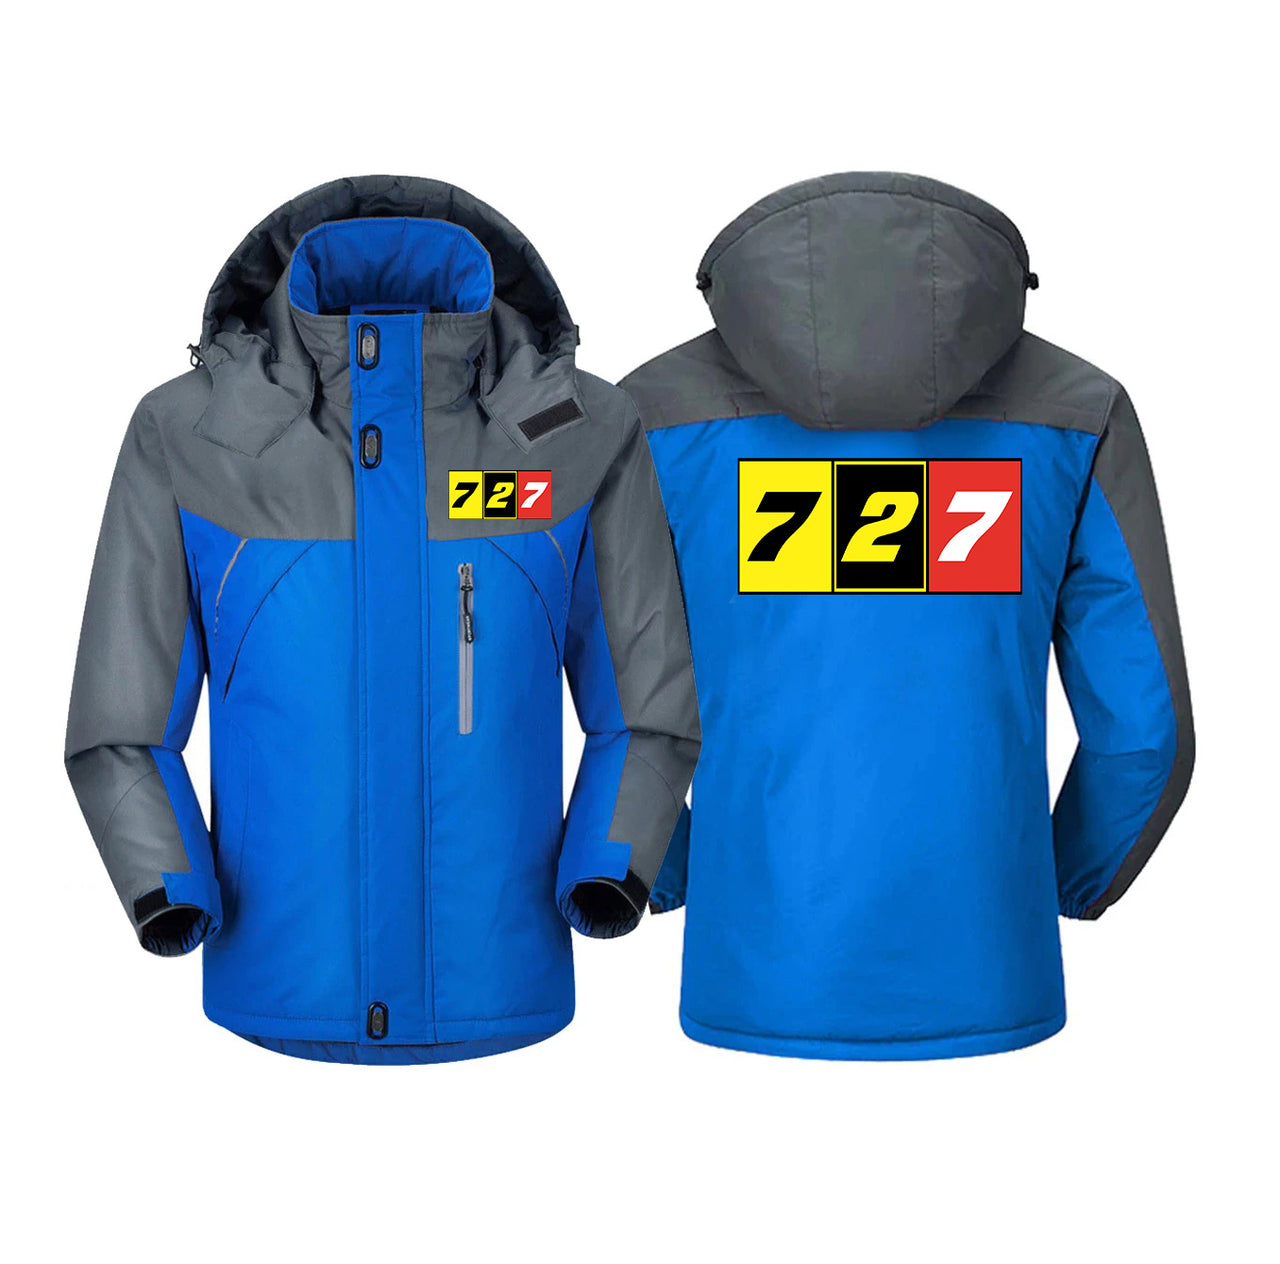 Flat Colourful 727 Designed Thick Winter Jackets